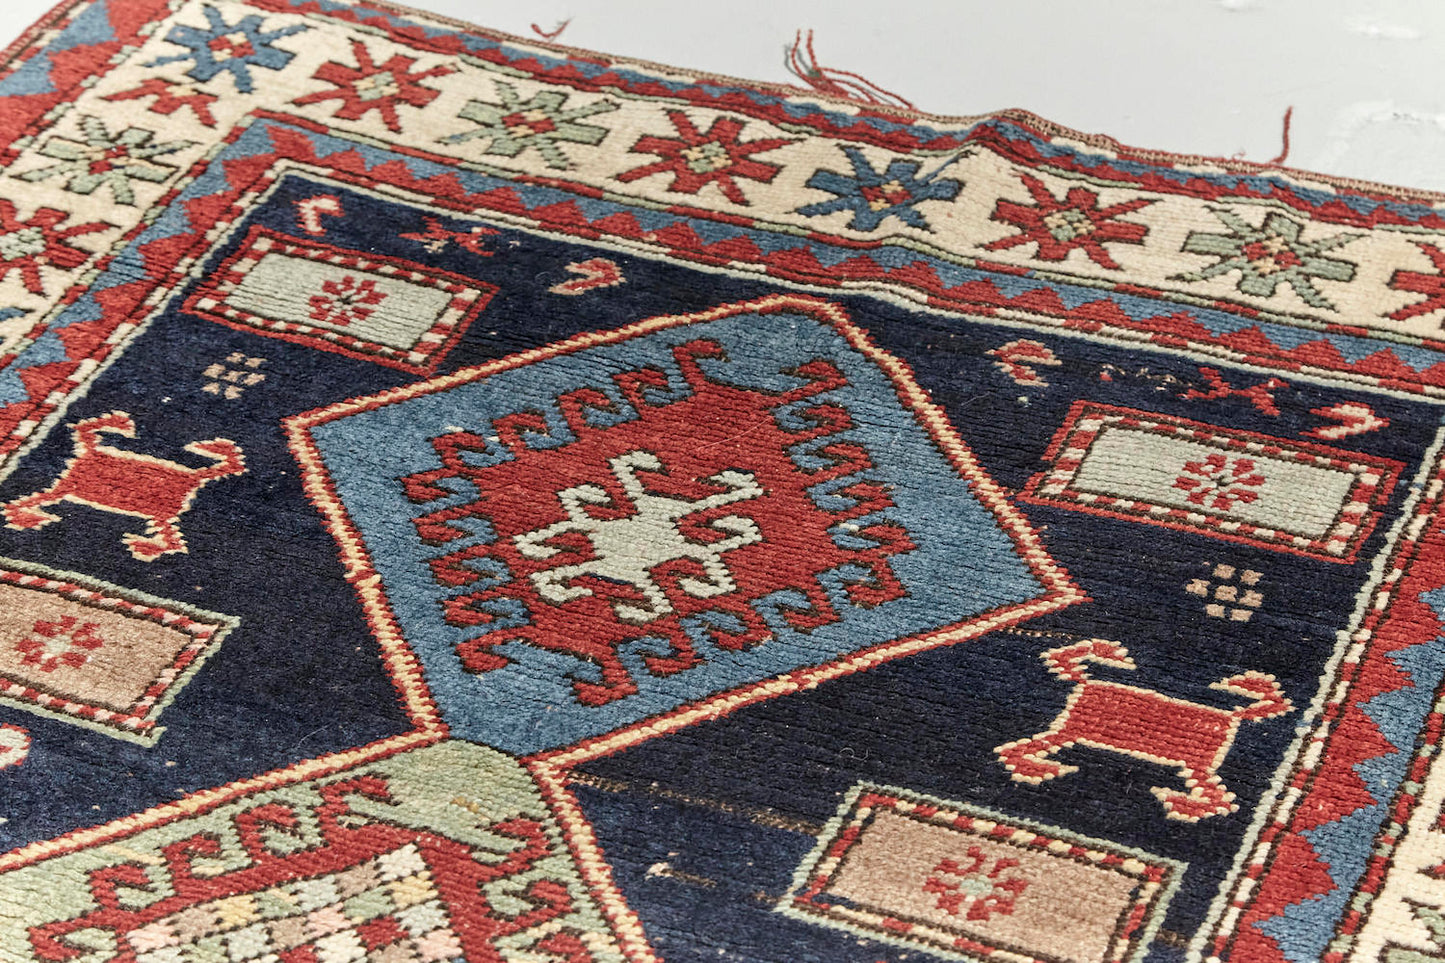 Antique hand woven Kazak Persian rug with dark blue base, blue and pale green diamonds across center with a cream and red border, featuring red, pale green and blue star-like shapes. Perfect for bedroom, living room dining room or kitchen. Available from King Kennedy Rugs Los Angeles.